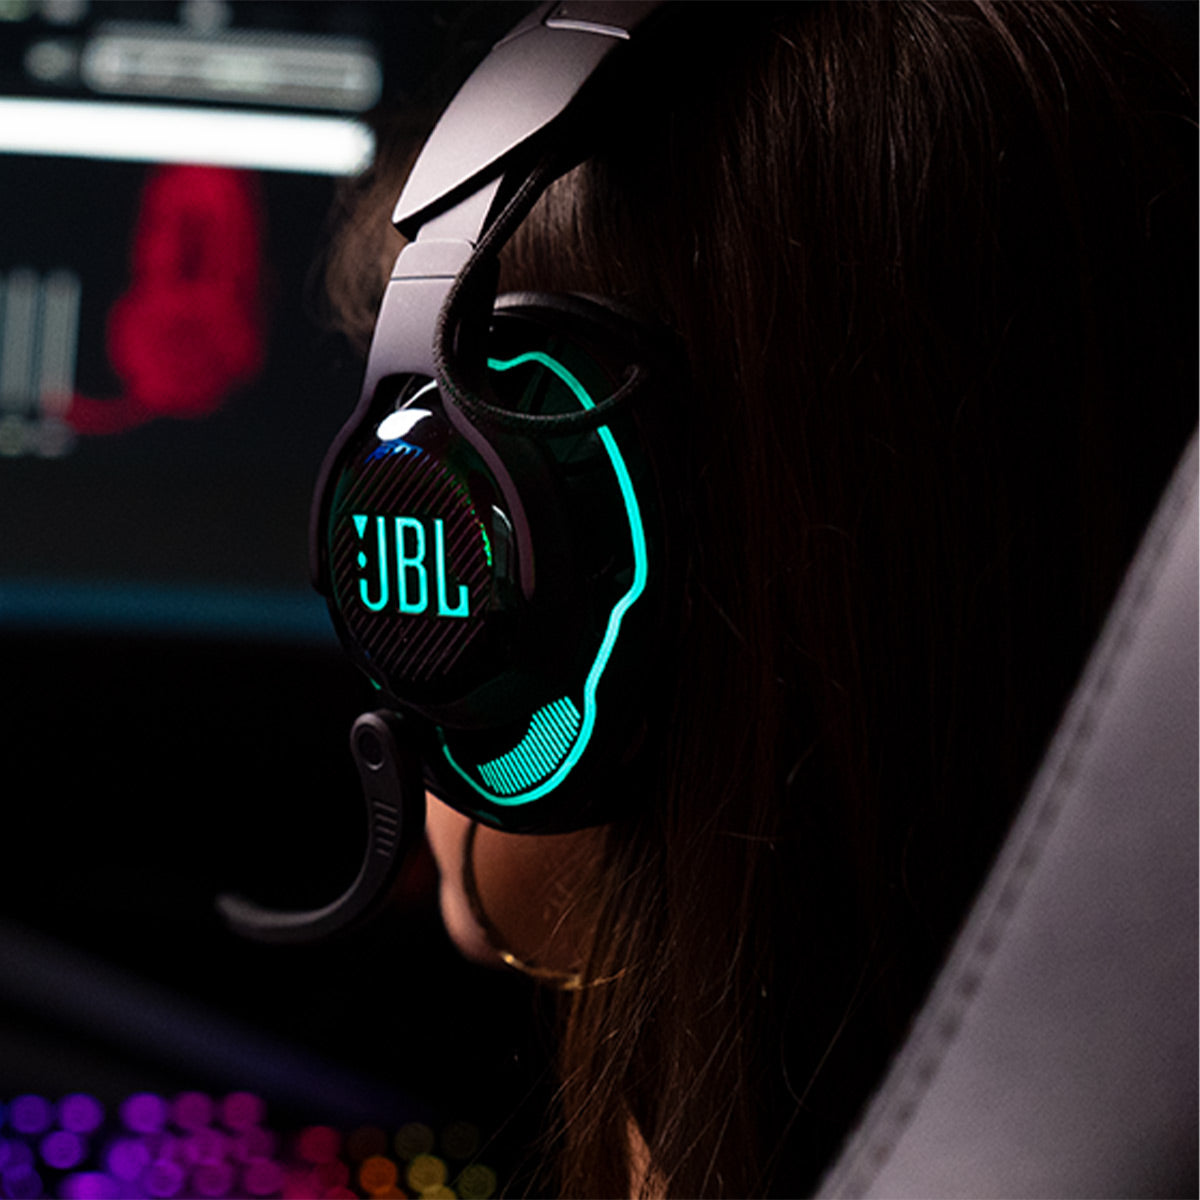 JBL Quantum 910 Wireless Gaming Headset with Active Noise Cancelling 2.4GHz